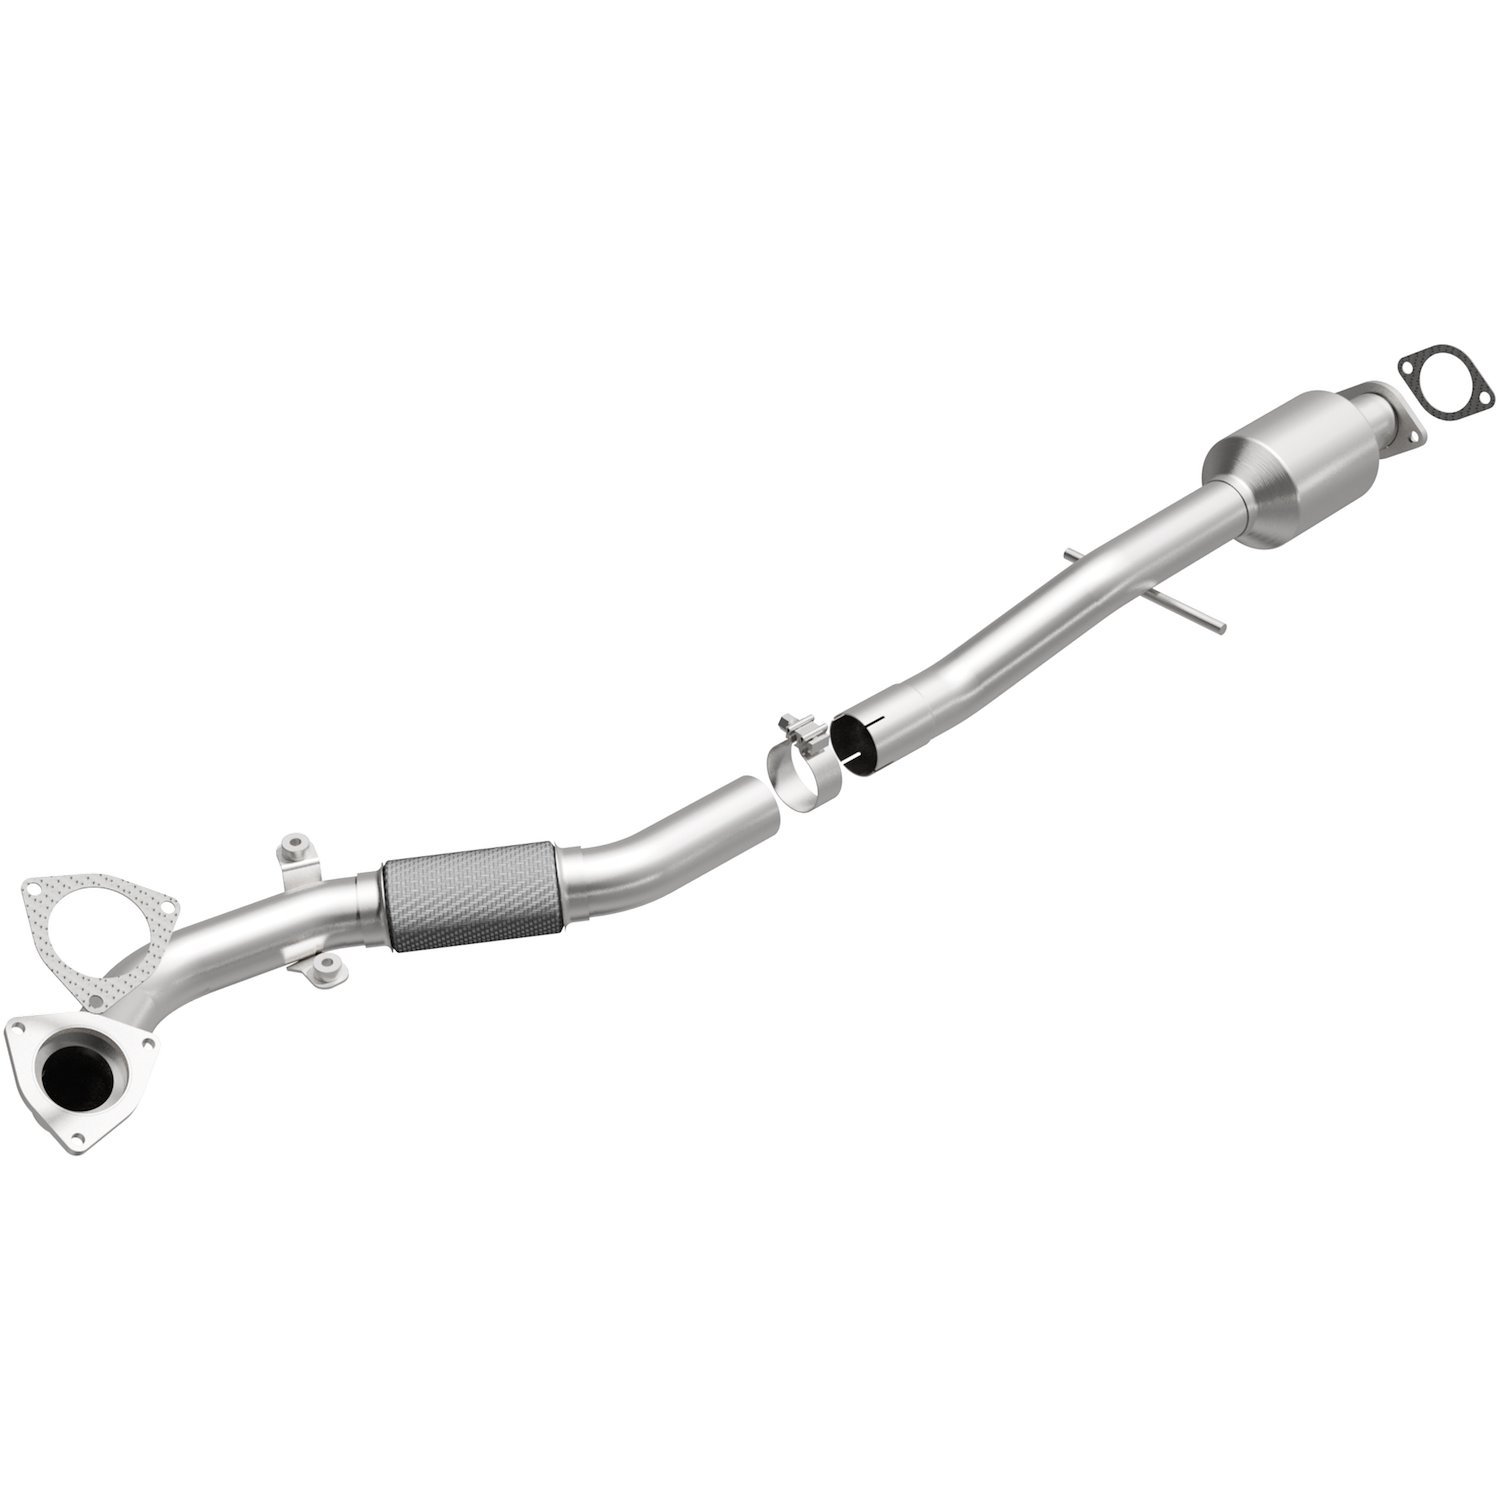 2014-2017 Buick Regal OEM Grade Federal / EPA Compliant Direct-Fit Catalytic Converter